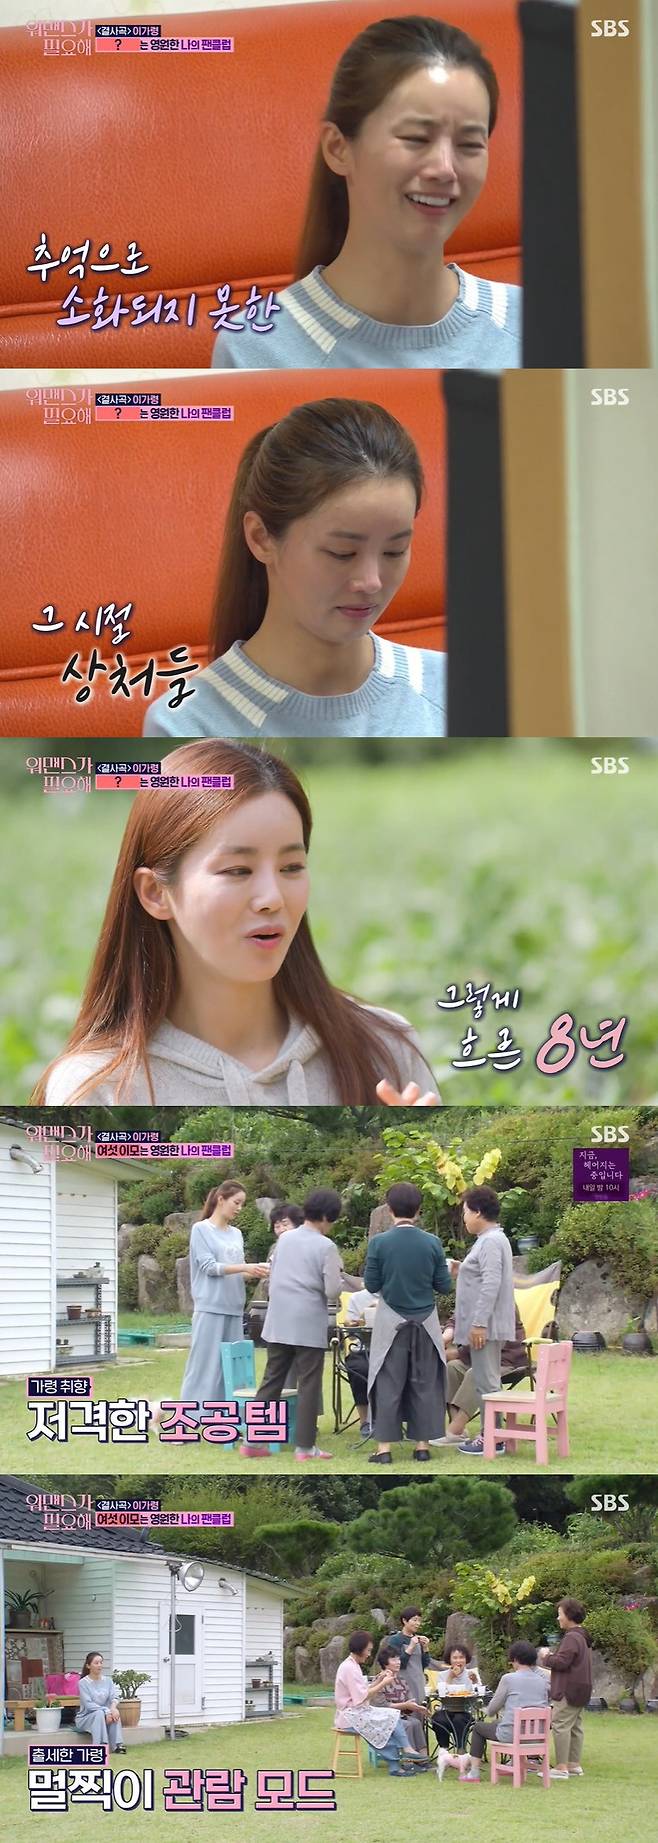 One Mans War Kim Gu reveals the second sex of late.On the 11th SBS entertainment program One Mans War is needed, Oh Yeon-soo, who introduces Kim Min-jong, a South Korean singer, to the four-member Seongsu-dong.Oh Yeon-soo, Yun Yu-Seon, Lee Kyung-min, and Cha-ryun, the four members of the Seongsu-dong cooked at home and prepared guests.New Face guest is Kim Min, a long-time male cousin of Oh Yeon-soo.Oh Yeon-soo was Kim Min-jong and Anyang-Yonggo alumni. I did broadcasting class together and did not work with Son Ji Chang.I have been seeing you for over 30 years when I meet you. Kim Min-jong said, When Ji-chang has a brother, he does not say that if he does not have a good sound of Hyeong-su. Oh Yeon-soo made a video call to Son Ji Chang.Son Ji Chang is currently living in the United States for business; Oh Yeon-soo covered the phone after only talking about the business, but the call has not yet been cut off.Kim Min Jong laughed at the nickname of Oh Yeon-soo in high school, saying, It is still stupid.Lee Kyung-min is also close to Kim Min-jong, who jokes that Kim Min-jong and Oh Yeon-soo could have been dating in high school.Oh Yeon-soo said, I made a mando corporation, because I did a broadcasting team together.But he made another child, and Kim Min-jong also laughed at Disclosure, saying, Who did not you date? I was very popular with Mando Corporation, and there were seniors who told me to report to you if there was anyone who was accumulating with Oh Yeon-soo.Kim Mins steamy Kim Gu also came to visit; Oh Yeon-soo and Kim Mins celebrated, giving a surprise gift for Kim Gu, who recently gave birth to her second child.Kim Gus second is a daughter. Kim Gu said, I did not do this with my acquaintances.Son Ji Chang and Oh Yeon-soo were gum-tampers recognized by all acquaintances; Son Ji Chang and Oh Yeon-soo speak on several phone calls a day.If your brother cant call Sister, he calls me right away, Cha Ye-ryun proved.Yun Yu-Seon wondered about the Ju Sang Book Cha Ye-ryun couple and Oh Yeon-soo said, I was her nickname One Plus One.Im stuck wherever I go, he said, certifying that he is a tough gum-tampered couple.Six people played the truth game and got the mood.Kim Gu asked, I have regretted marriage and Yun Yu-Seon replied, There is, and Oh Yeon-soo replied, No.Cha Ye-ryun, who was worried, replied no, but Cha Ye-ryun proved to be false and laughed.Oh Yeon-soo teased, What if you regret it when youre newlywed?Oh Yeon-soo, who has never regretted his marriage with Son Ji Chang, said, We do not love it crazy, but we did not regret it.I think I would have been worried the same with anyone. Lee Ga-ryung was living in the Jecheon Outdoor House.This is a place where my grandfather and grandmother often visit as a place where their families heal after leaving. Lee Ga-ryung said, Drama happened while working as a model.I came out as a friend, and in 2014, I was ready for the drama, but I was not able to work for a long time because I was not good at it. Lee Ga-ryung, who has been living in obscurity for a long time since then, said, I have a good opportunity in seven to eight years and have done this work.So, marriage writer divorce composition became my masterpiece. Lee Ga-ryung went to a nearby large house garden and picked up various vegetables and cooked them skillfully.Lee Ga-ryung, who took a nap after enjoying a relaxing outdoor rice bowl in the yard, woke up to her mothers arrival.My mother was so nervous about seeing Lee Ga-ryungs phyto-scene in the song The Joining Song. Because of her memory of getting off Midway for death during MBCs Indomitable Chamae.Lee Ga-ryungs mother said, When I got off, my heart was sore, but I wanted to do a god who killed the child again because I was a god who was a phyto god. Lee Ga-ryung showed tears as if he were crying.Lee Ga-ryung said, After I passed, I looked back and I saw that I took a god, not a work a year, but eight years ago. Its been eight years since I took eight gods.My mother said that Lee Ga-ryungs Actor was a lot of trouble, I thought I should stop because I was not going to go, but I would be an entertainer.Then I think I did well this time. 